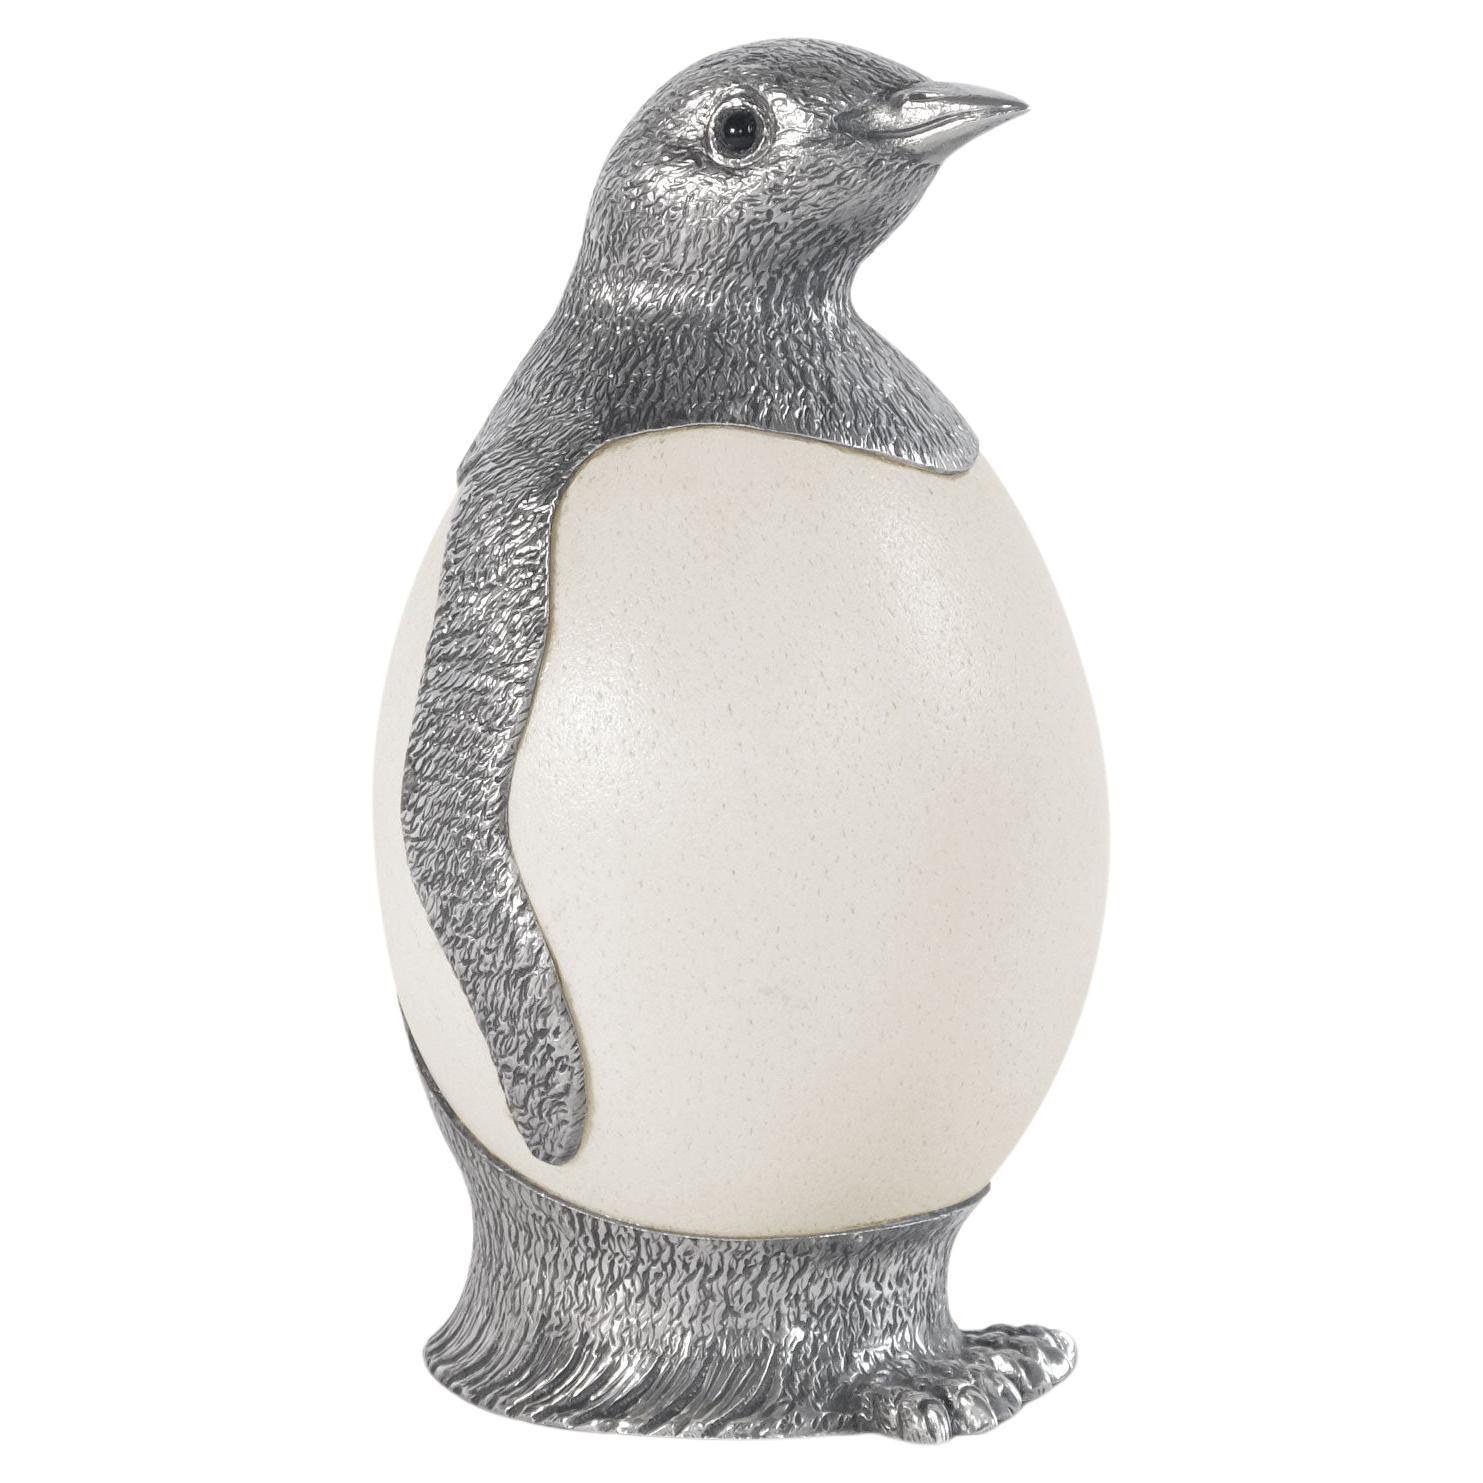 Penguin by Alcino Silversmith Handcrafted in Sterling Silver with Ostrich Egg